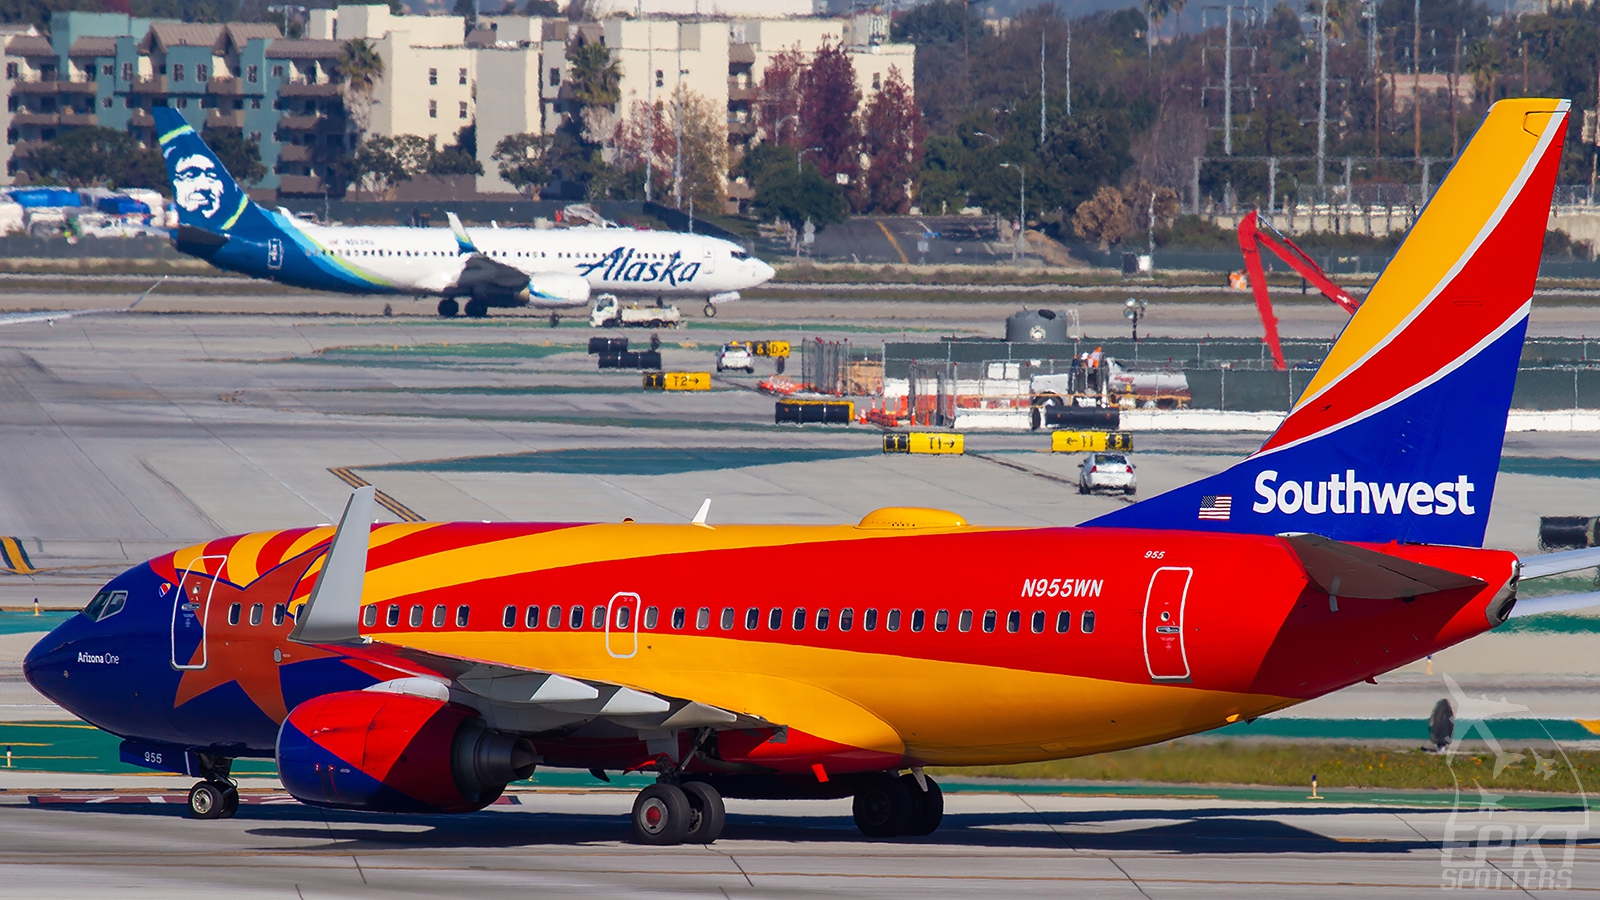 N955WN - Boeing 737 -7H4 (Southwest Airlines) / Los Angeles Intl Airport - Los Angeles United States [KLAX/LAX]